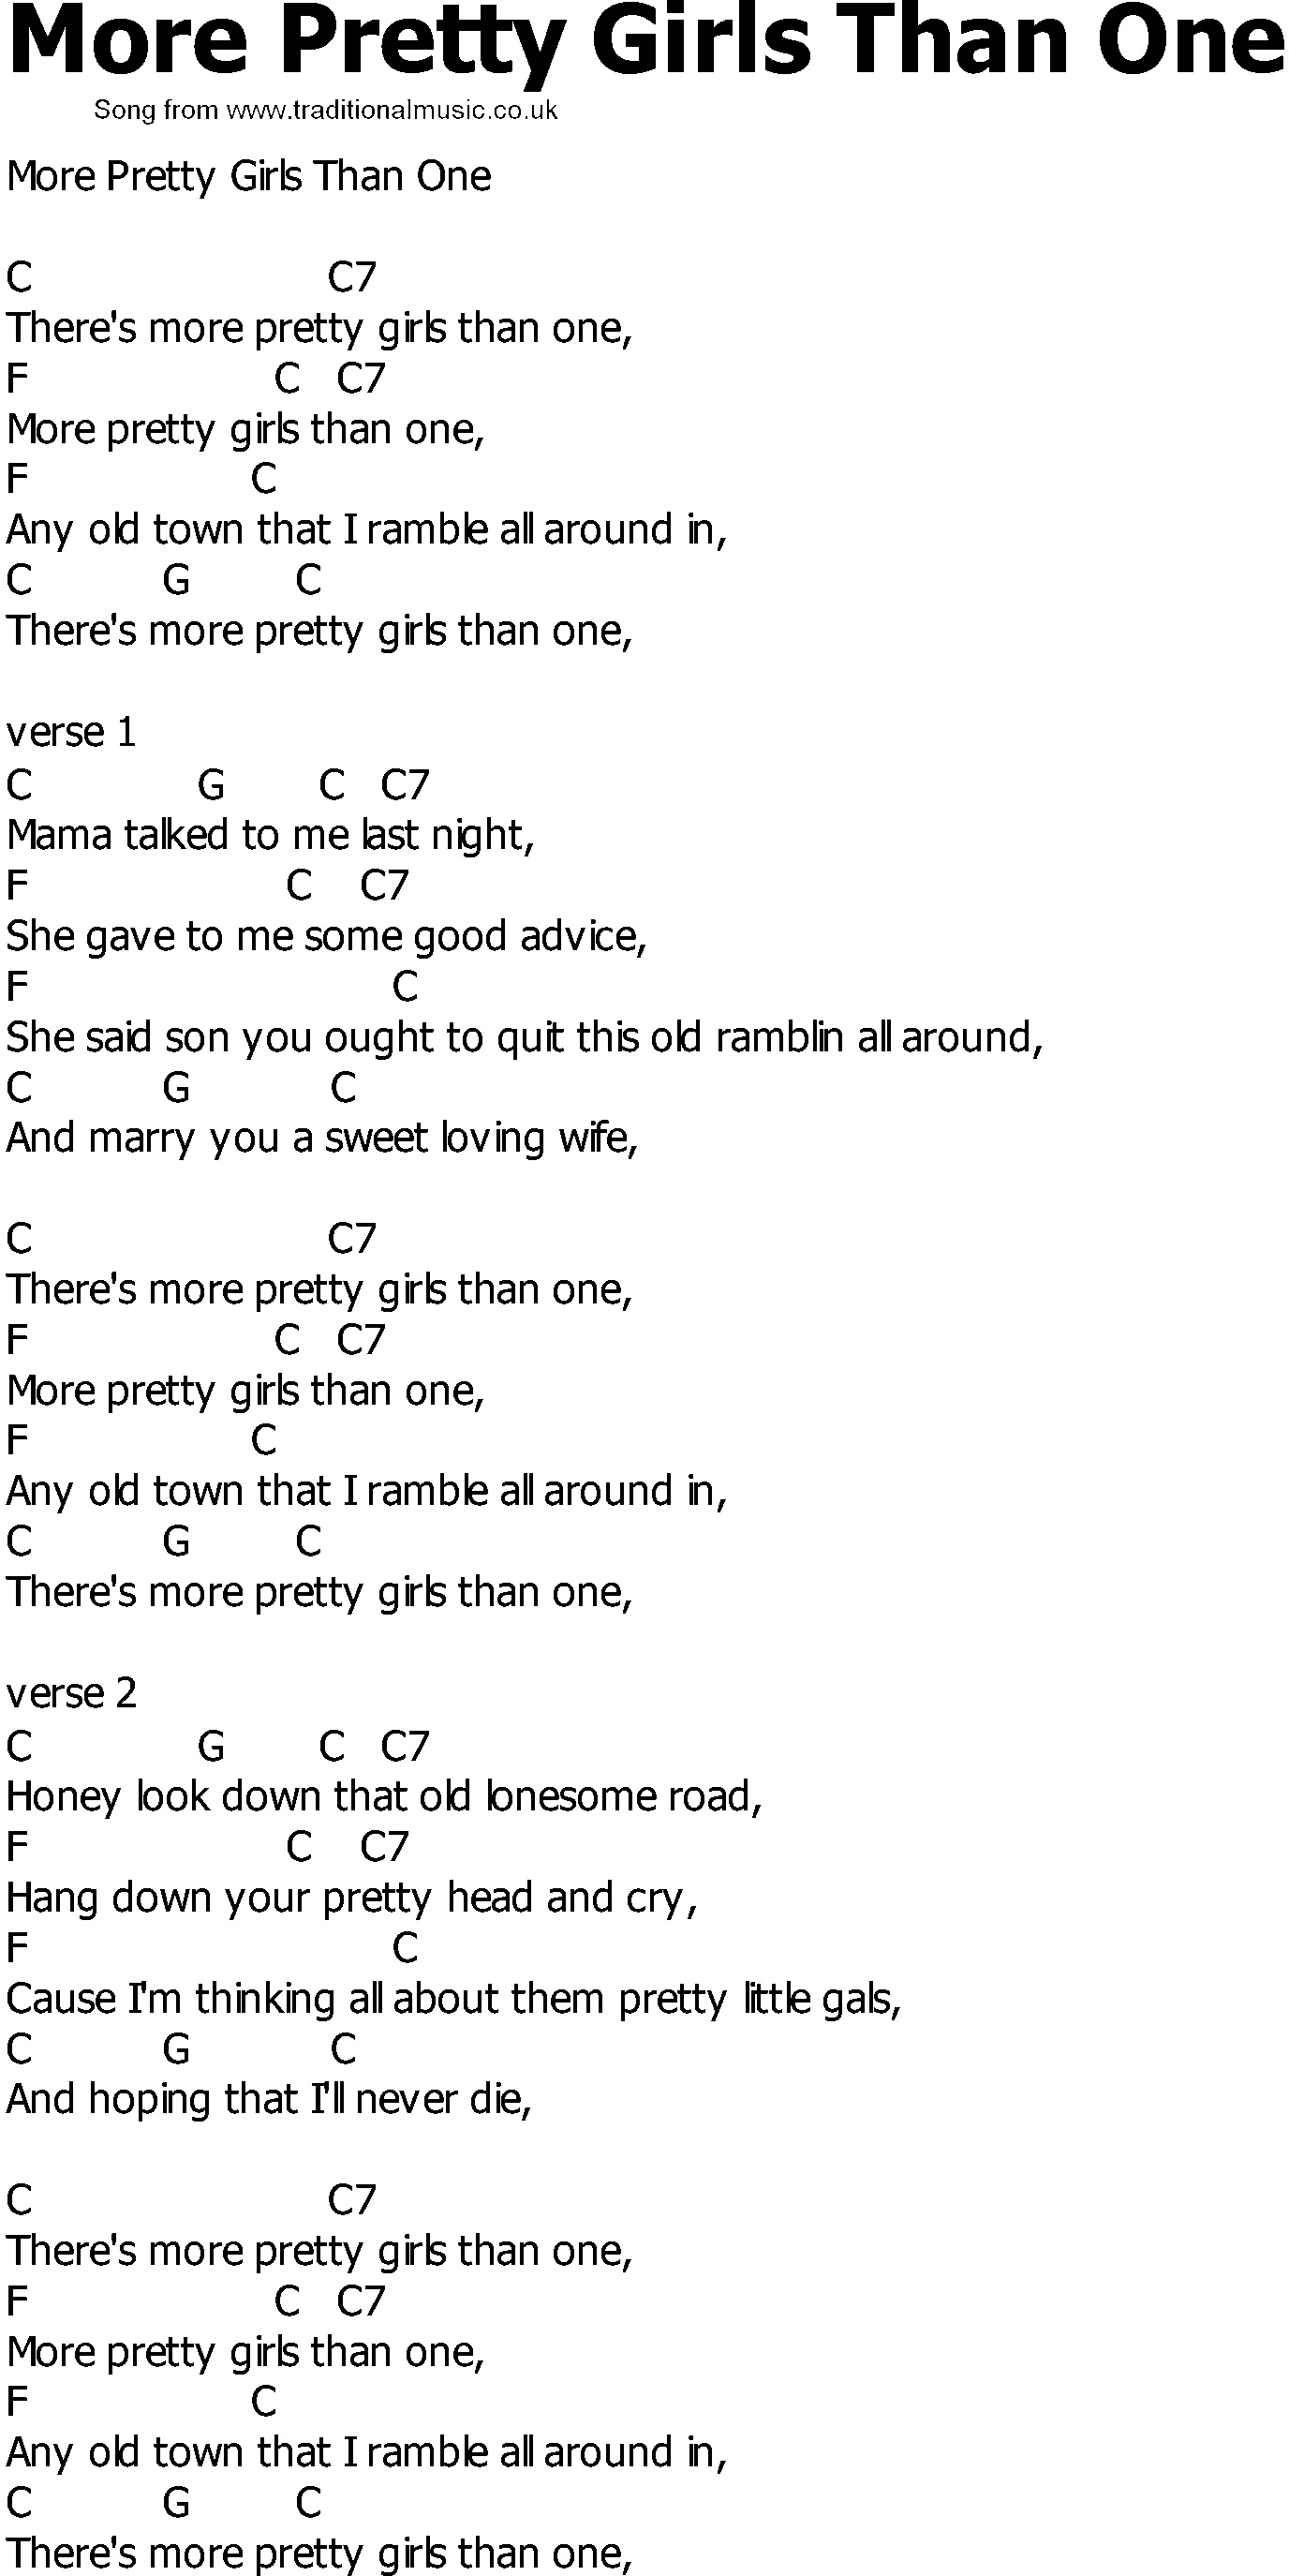 About girl a lyrics song 10 Songs